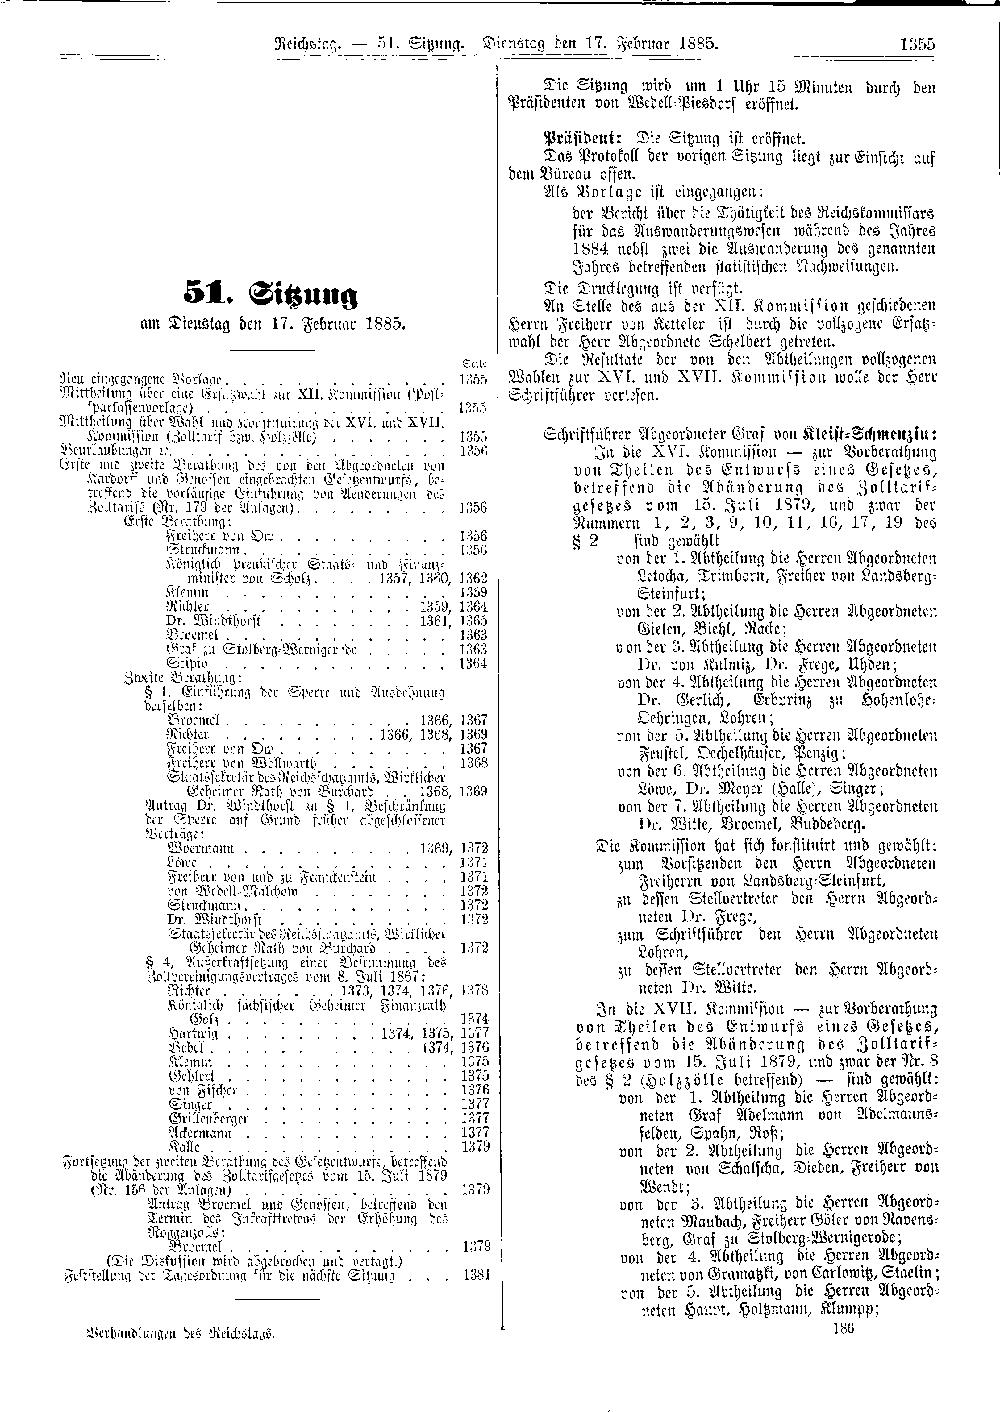 Scan of page 1355